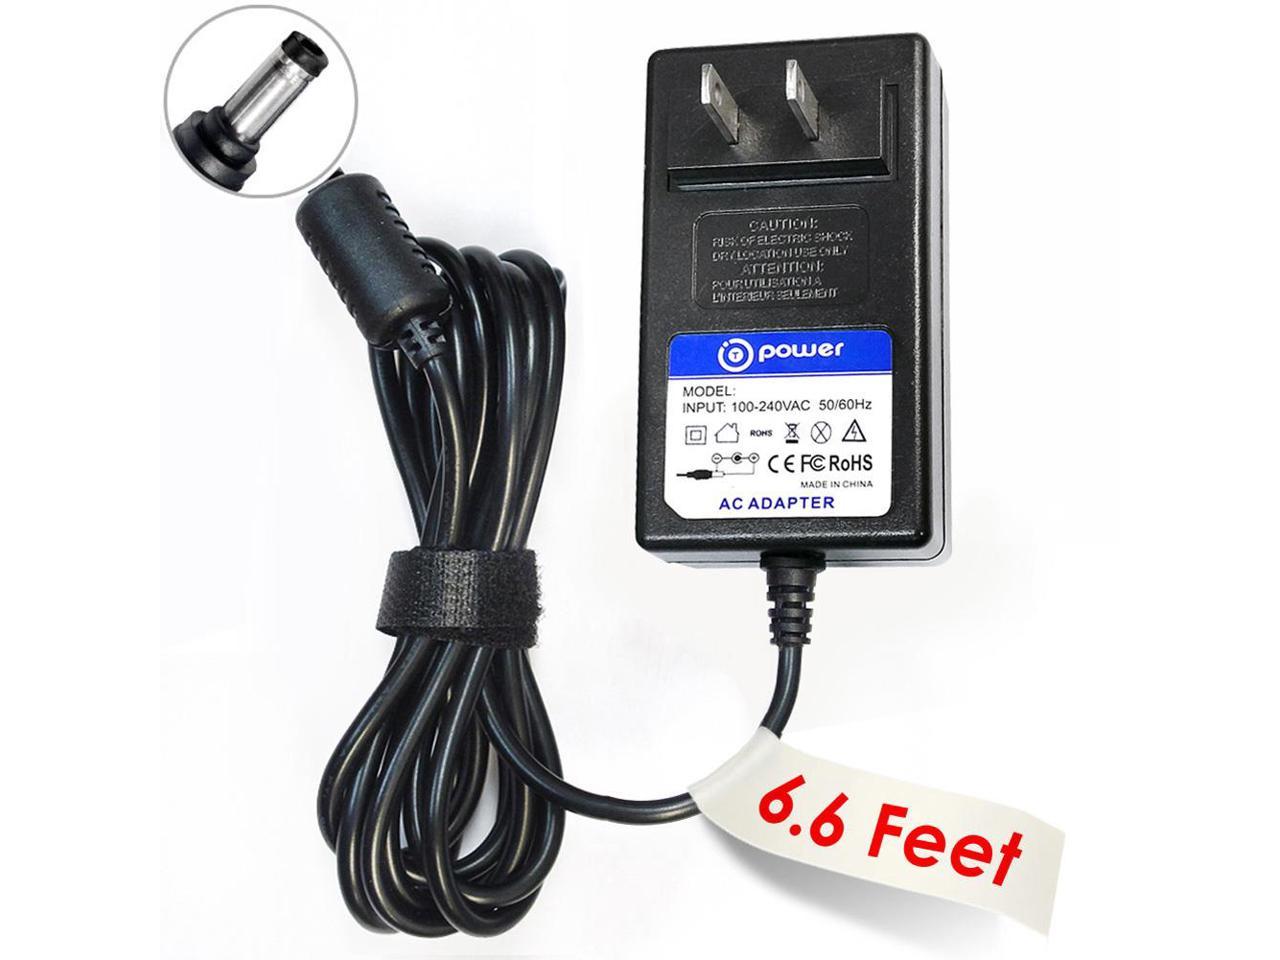 New 24V Ac Dc Adapter for Silhouette Cameo 1 2 3 SD Portrait Studio Machine Replacement Power Supply Cord Adaptor Electronic Cutting Tool Charger AC Adapter 